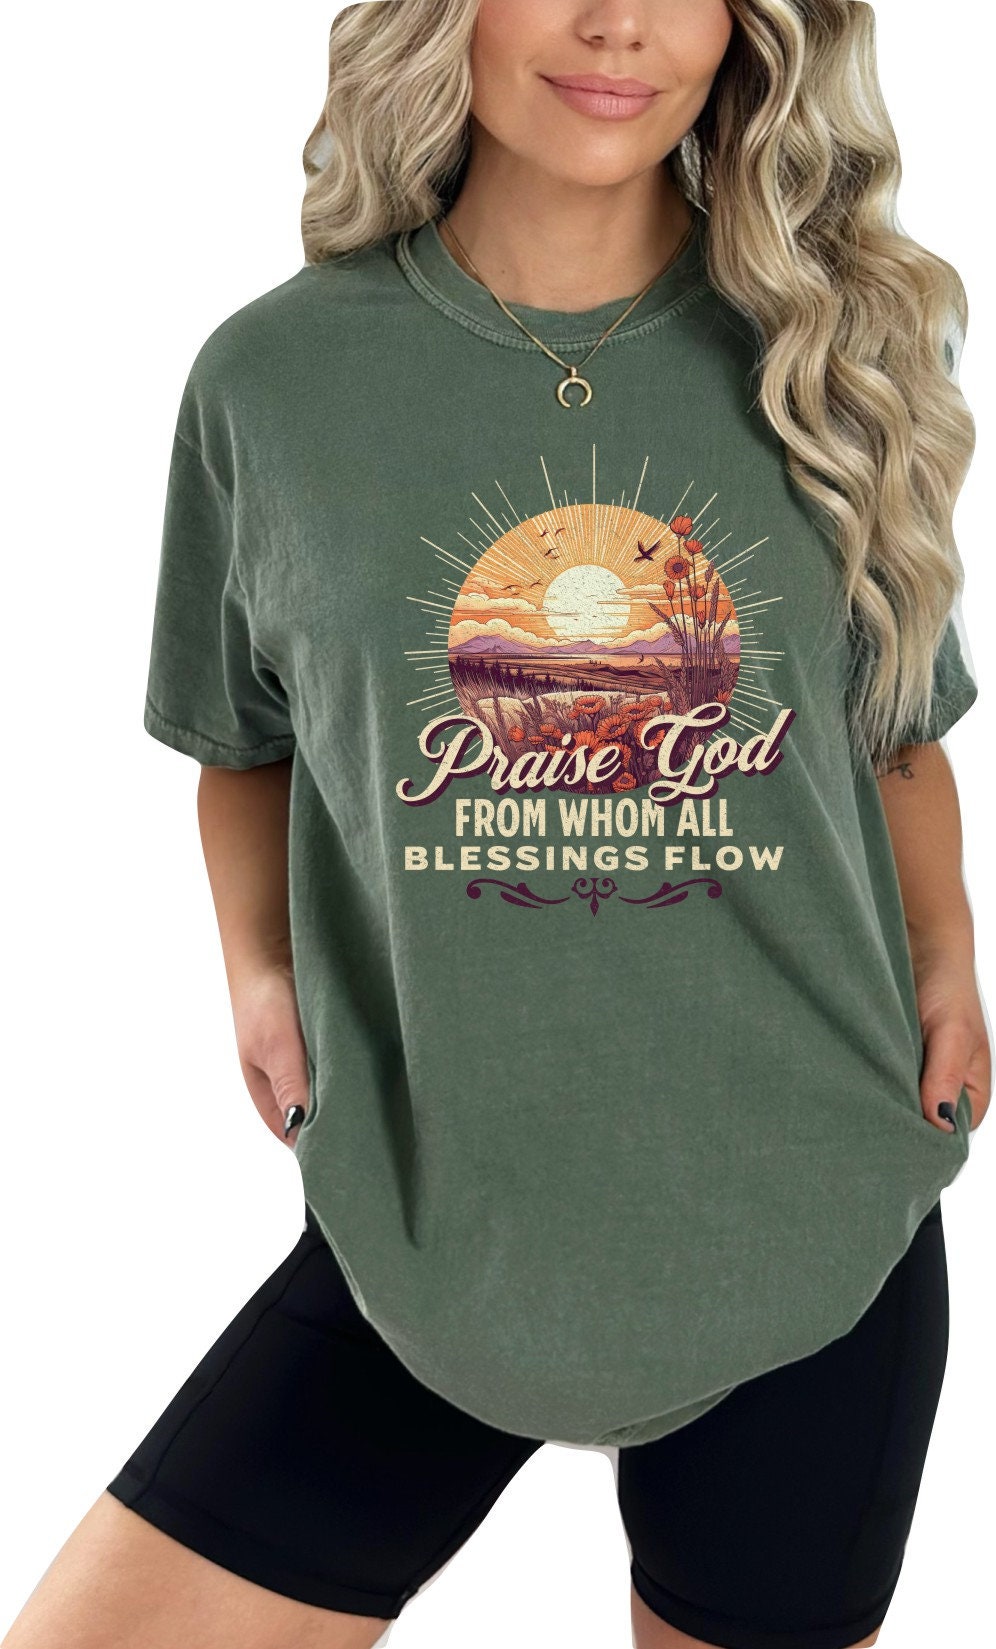 Christian Shirts Religious Tshirt Christian T Shirts Boho Christian Shirt Bible Verse Shirt Praise God From Whom all Blessings Flow Shirt